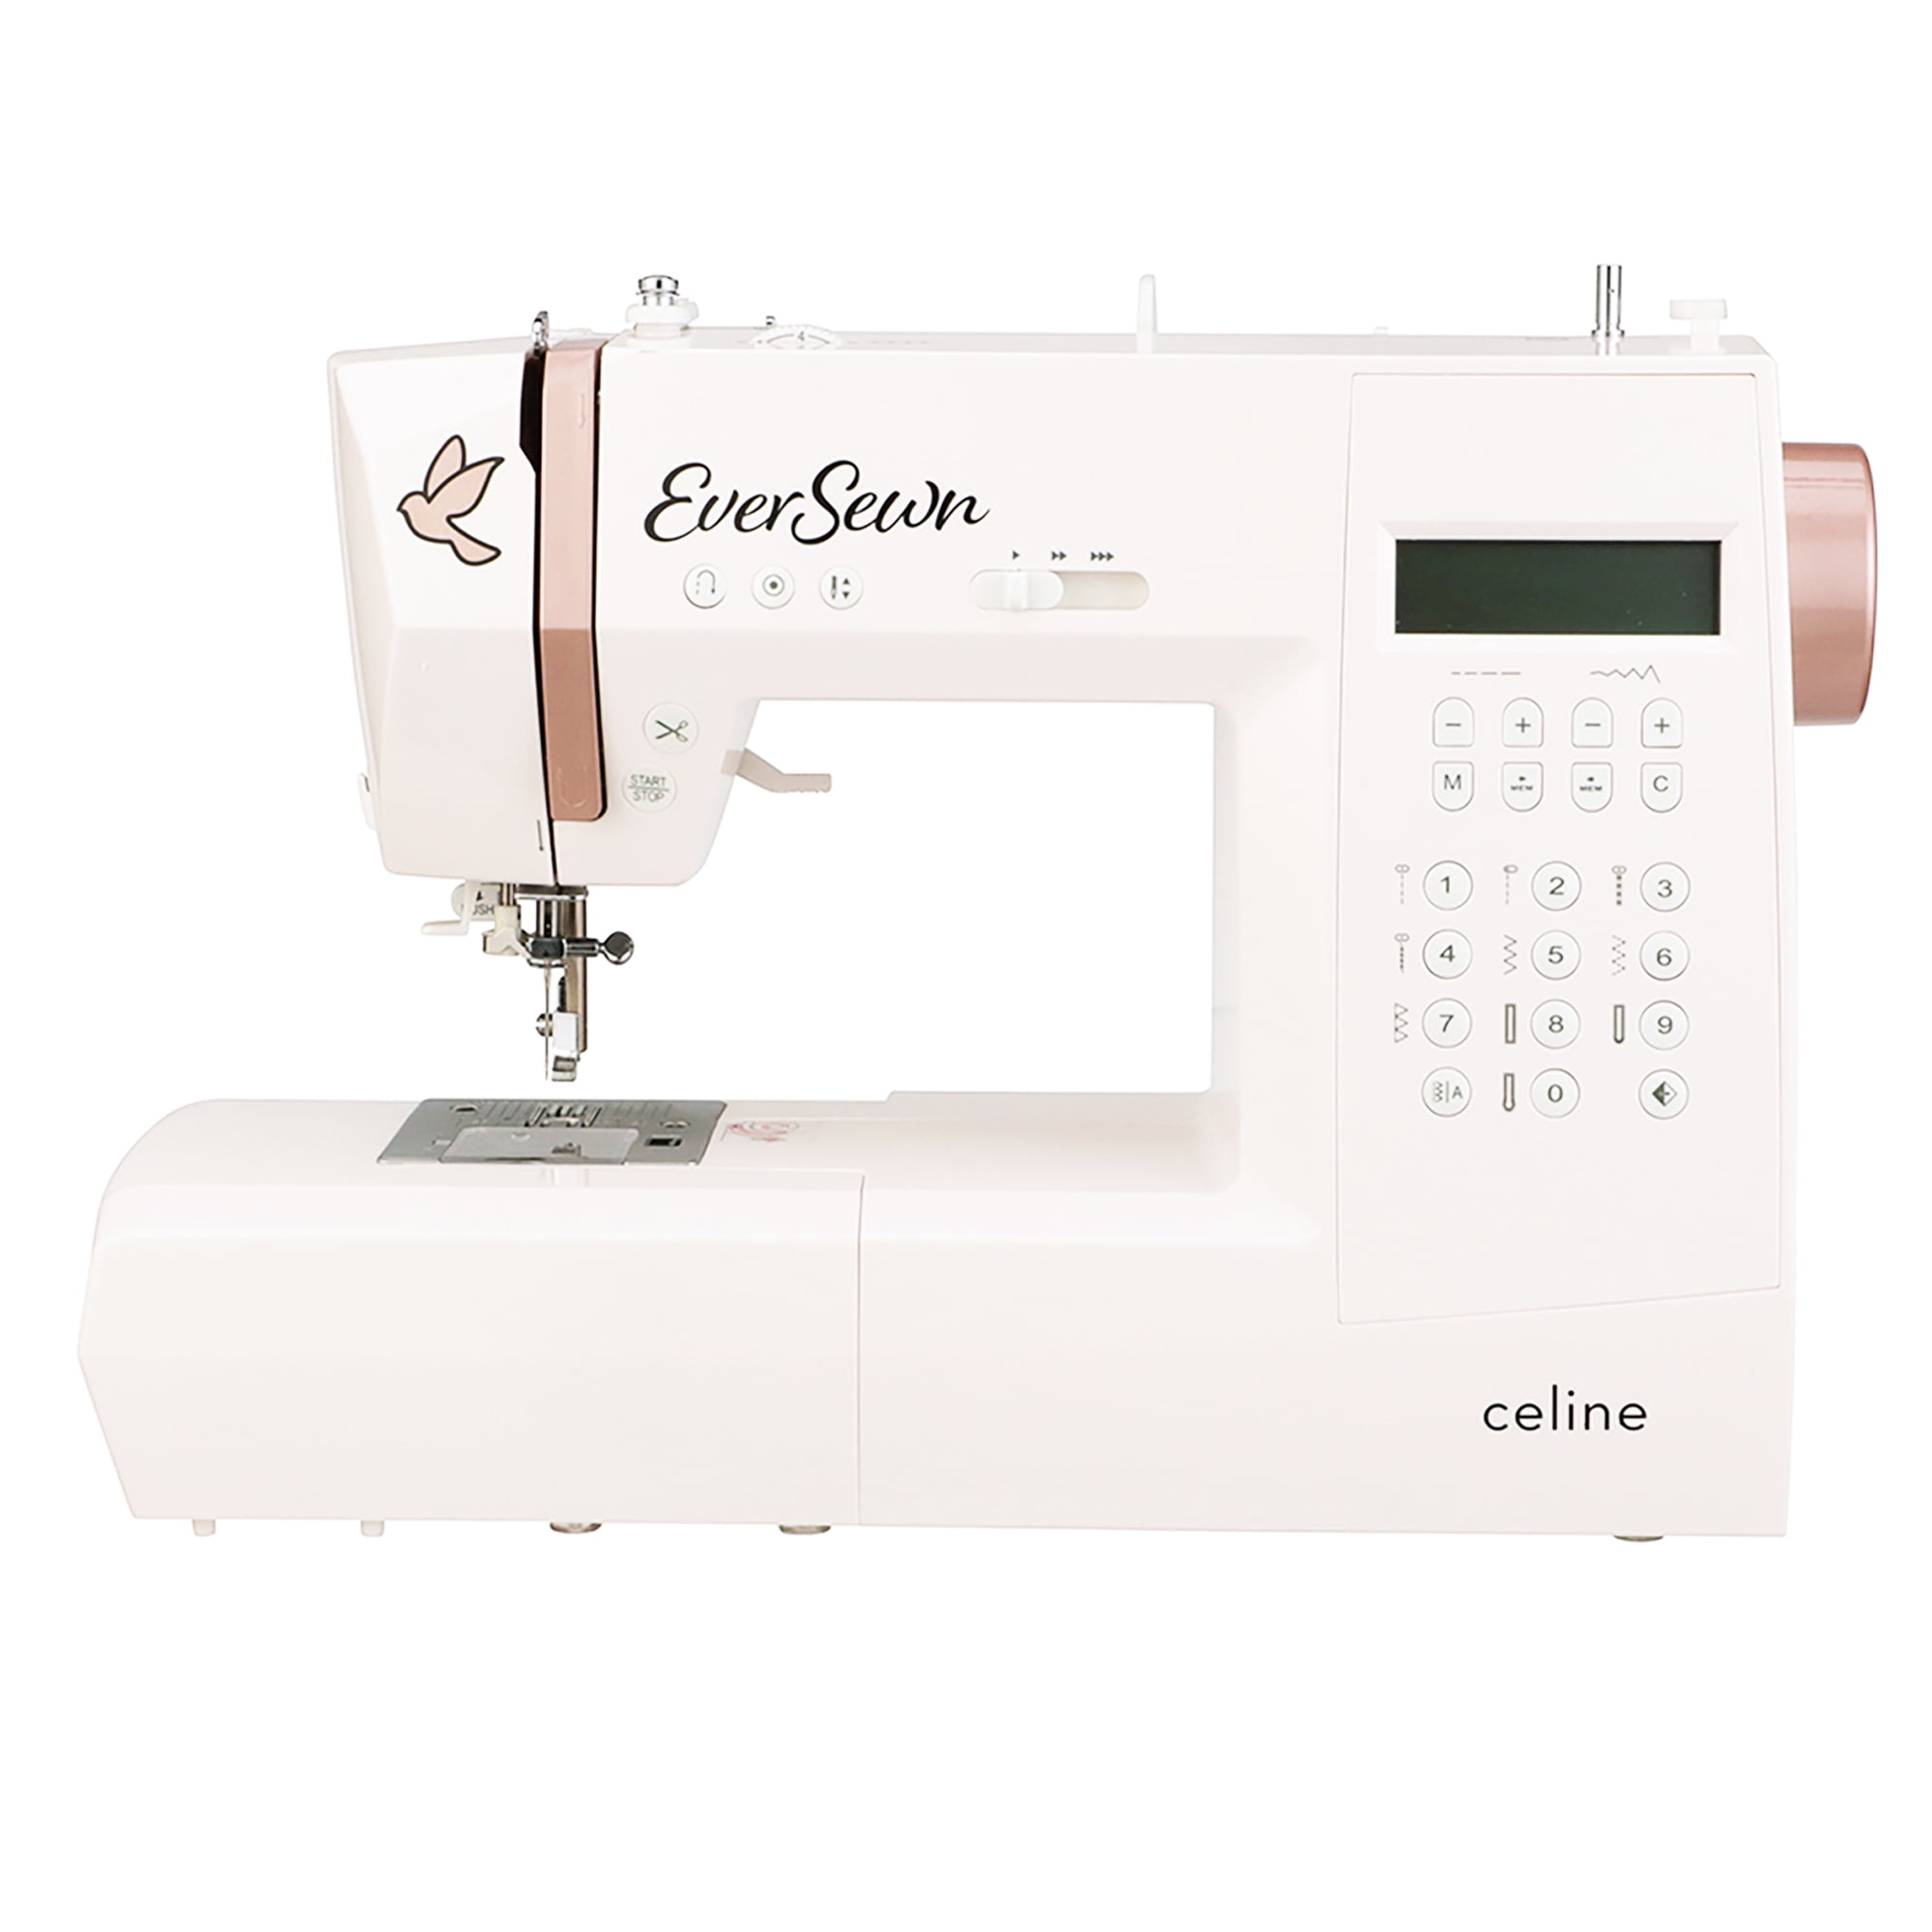 Brother SQ9285 Sewing Quilting Machine+150 Stitches+Extension Table+10 Feet+Font